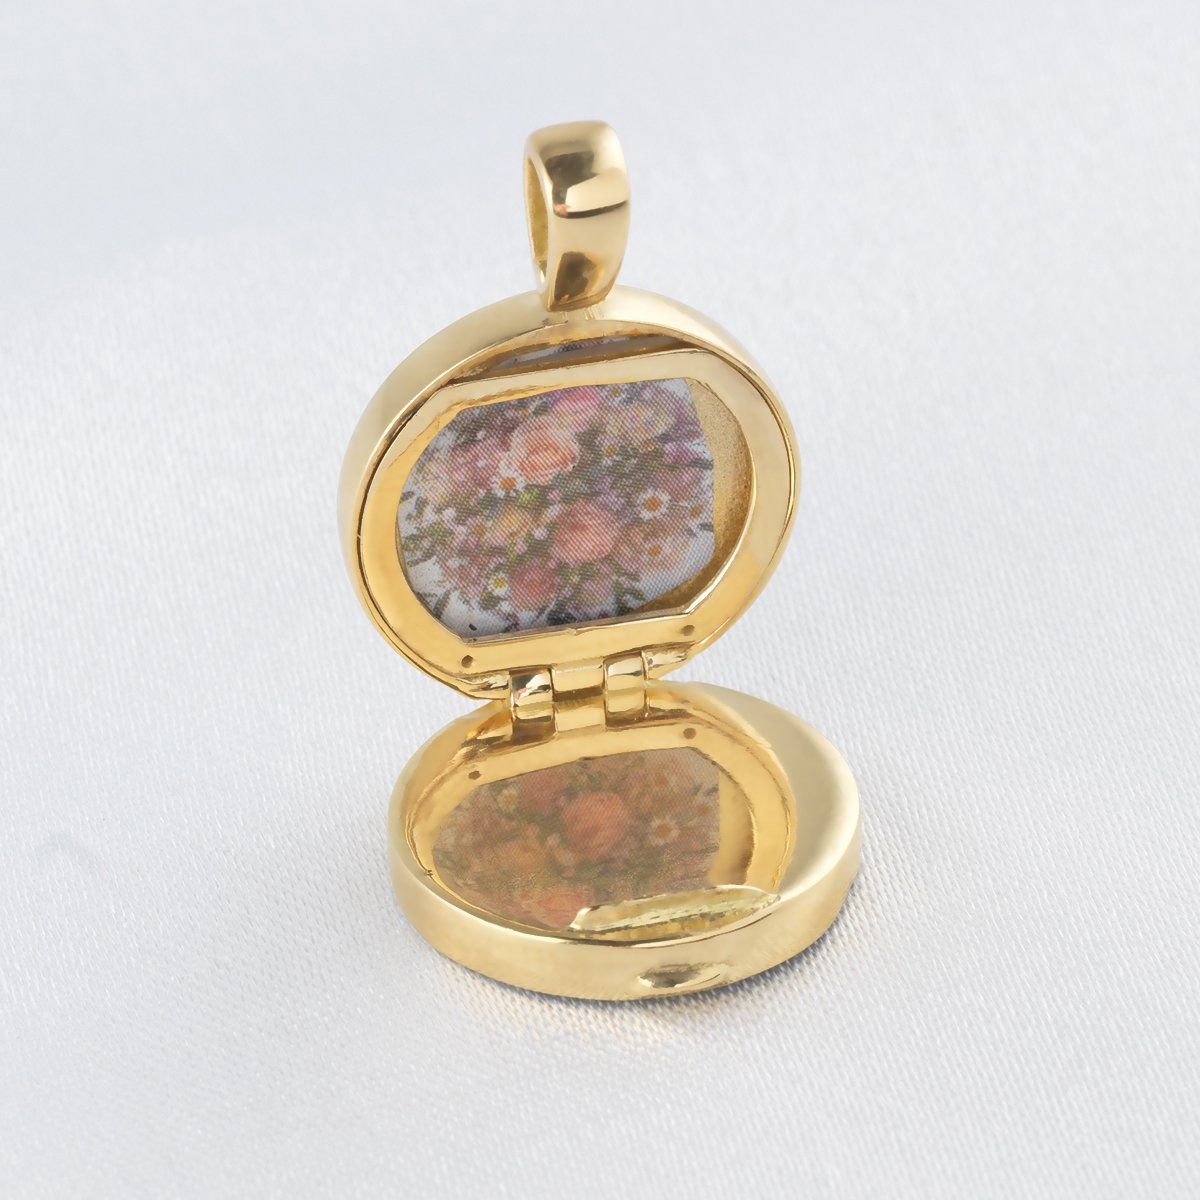 Open view of an 18 ct gold round locket showing an inner glass frame 